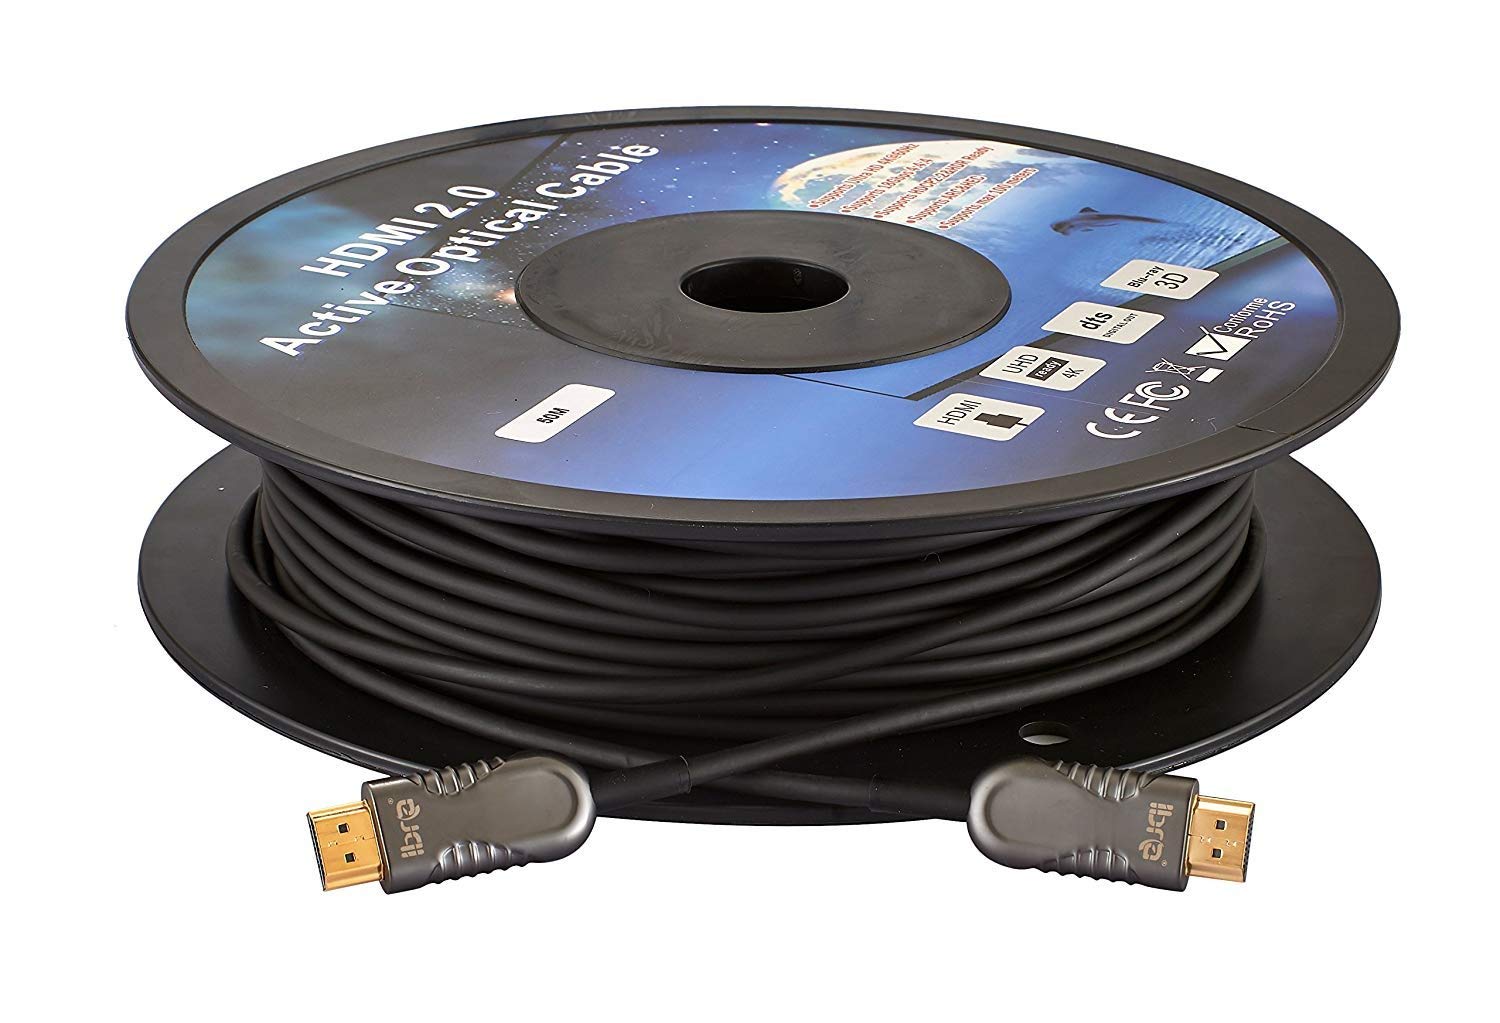 10M Fiber Optic HDMI High Speed Cable v2.0 18Gbps HDMI Lead Support 4K@60Hz/4:4:4/3D/4K HDR HDCP 2.2 for Apple TV, HDTV, Roku TV Box, Xbox One X, Home Theater, PS4, PS3 etc - IBRA OPTICAL HDMI Cable